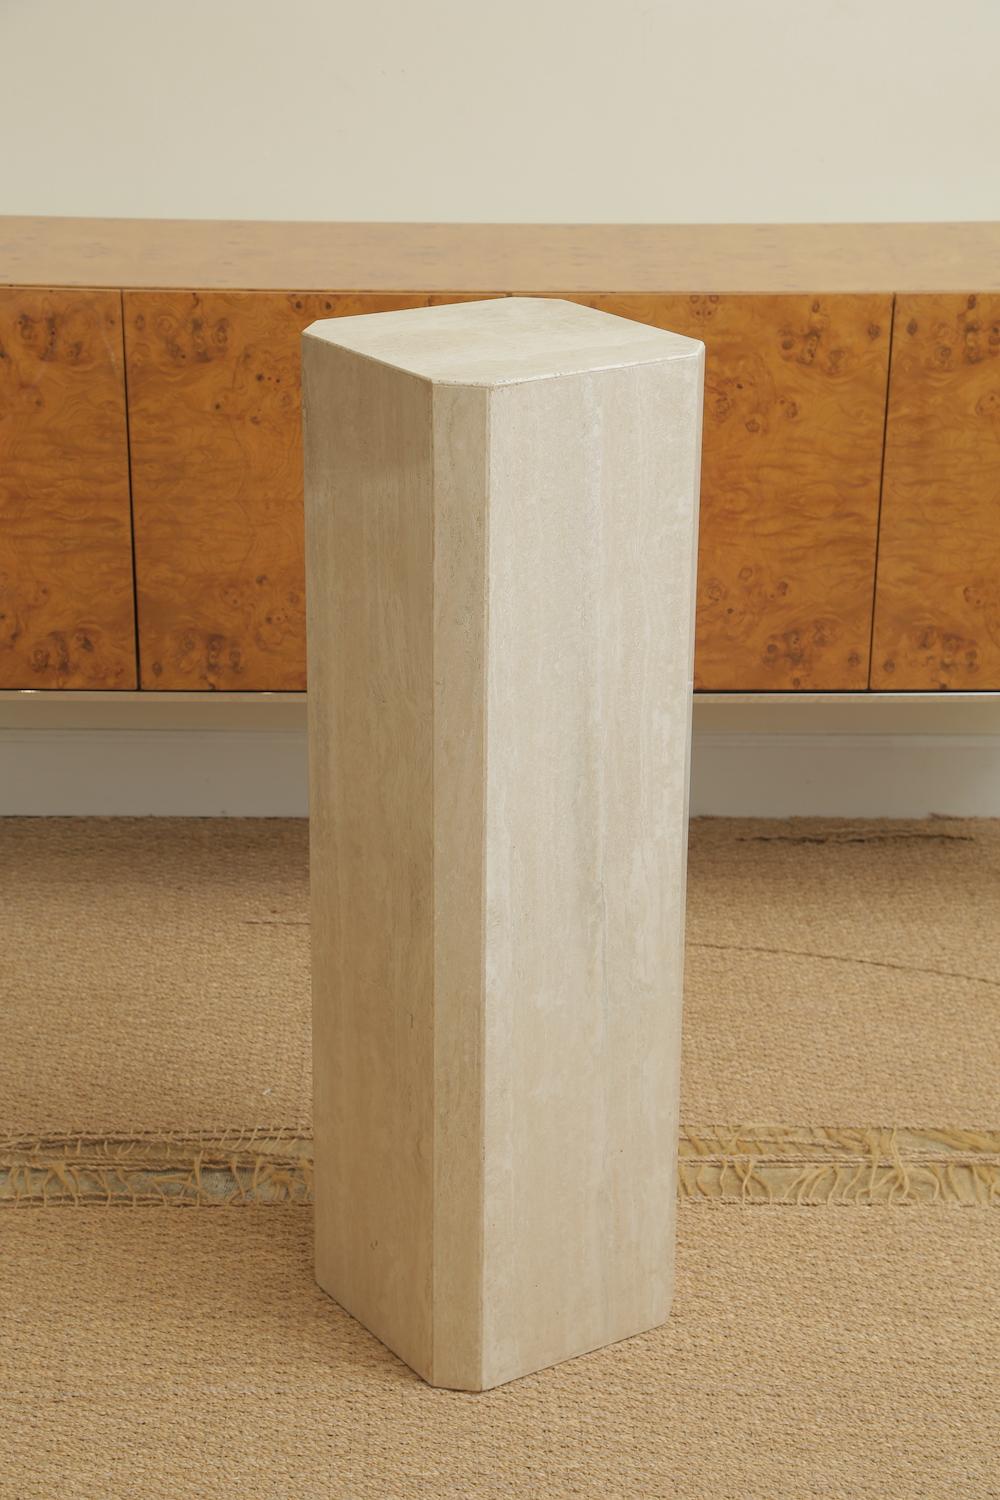 This travertine pedestal column from the 1980s is great for placement of a work of art or sculpture. This was part of a 2 part sculpture by a noted Japanese artist named Kiku. The stone torso got sold separately. This will fit beautifully in a